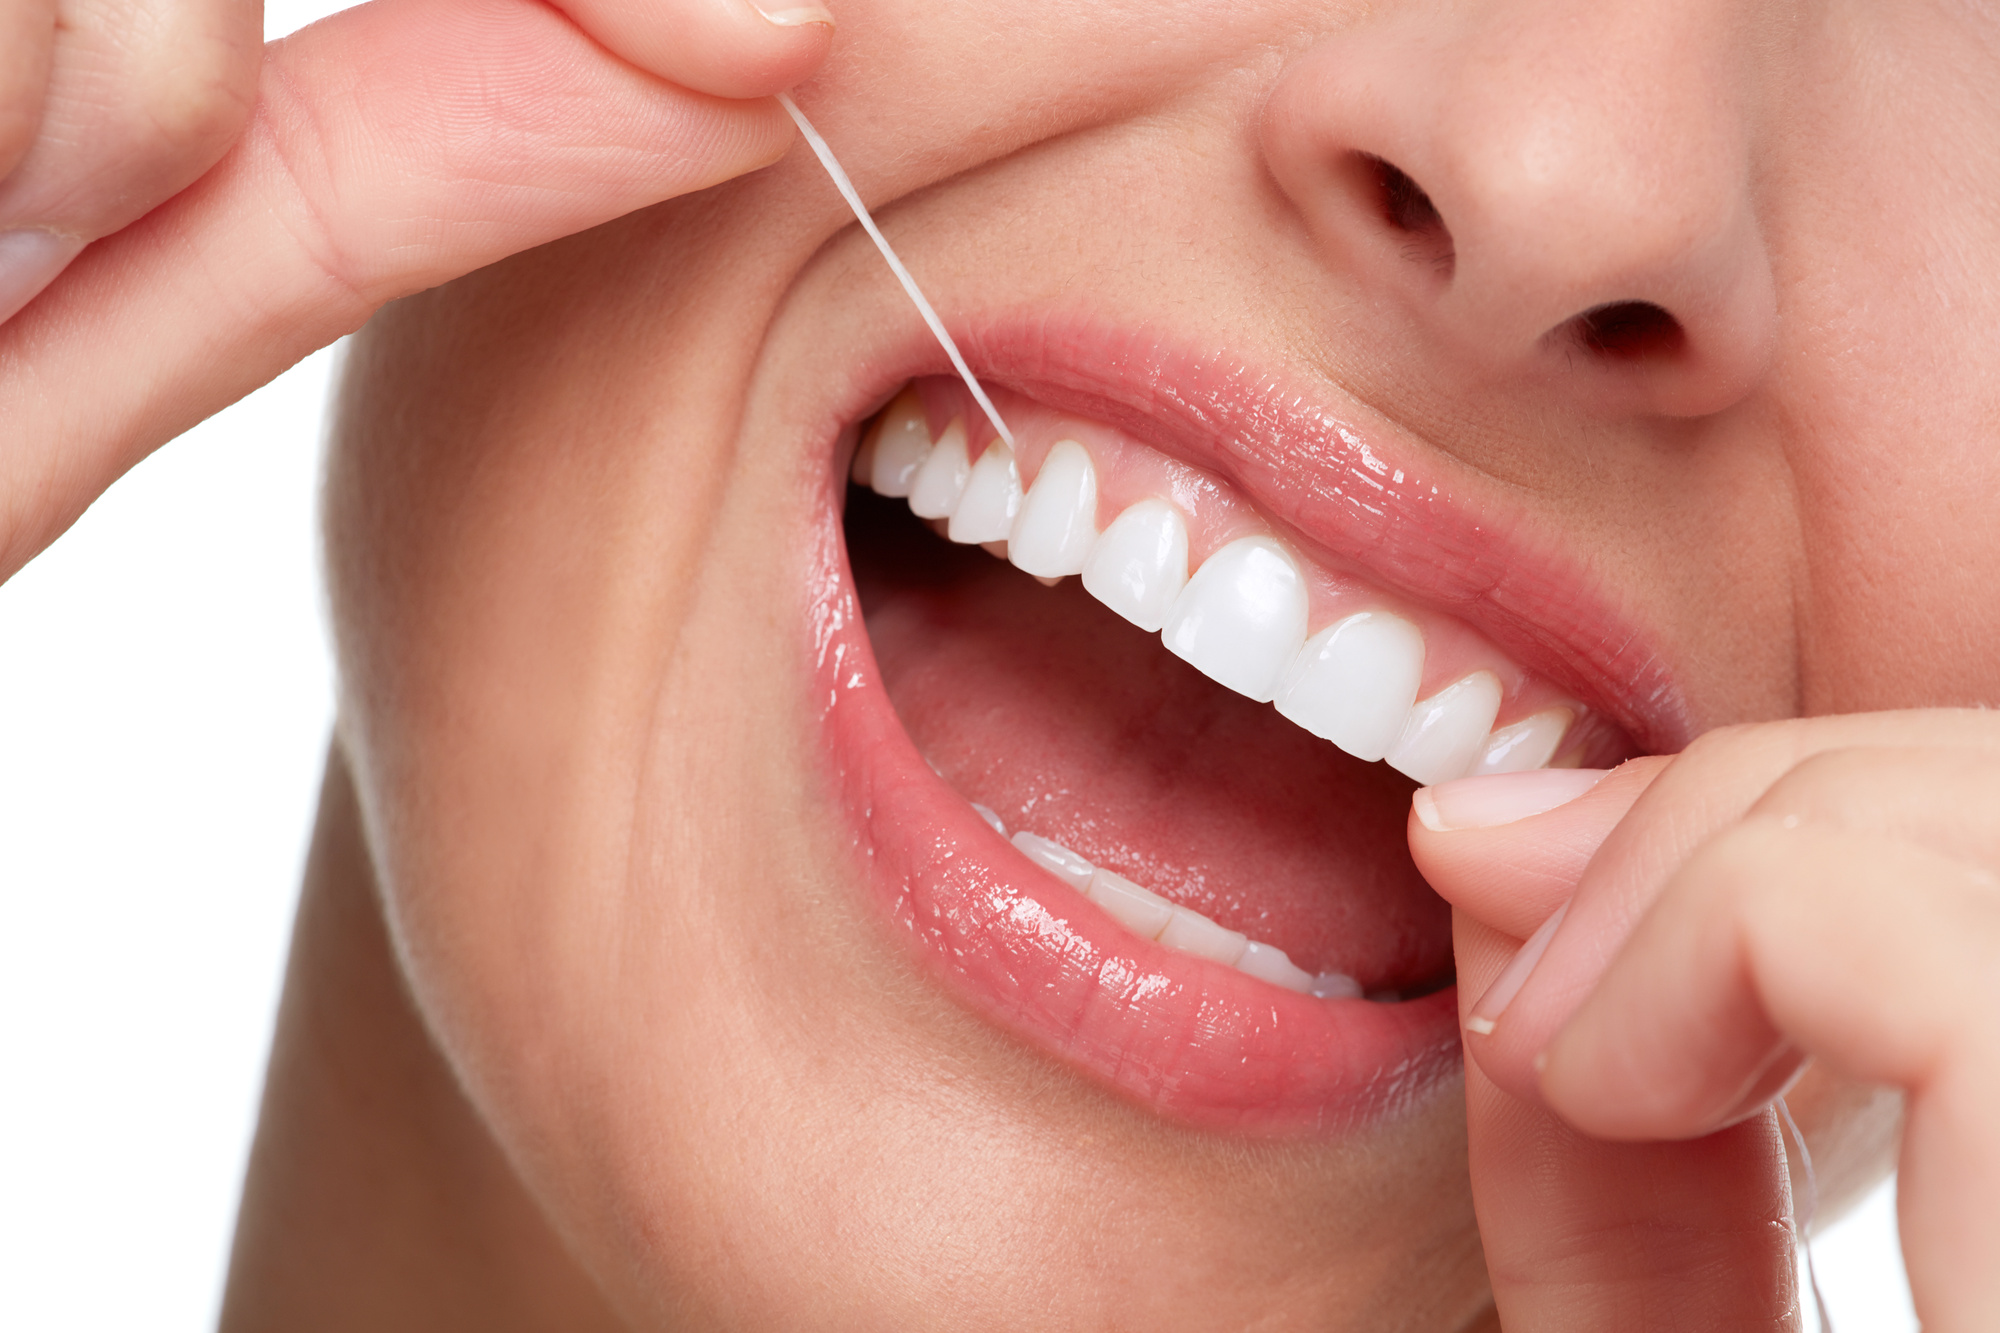 Flossing Your Teeth: How to Do It the Right Way